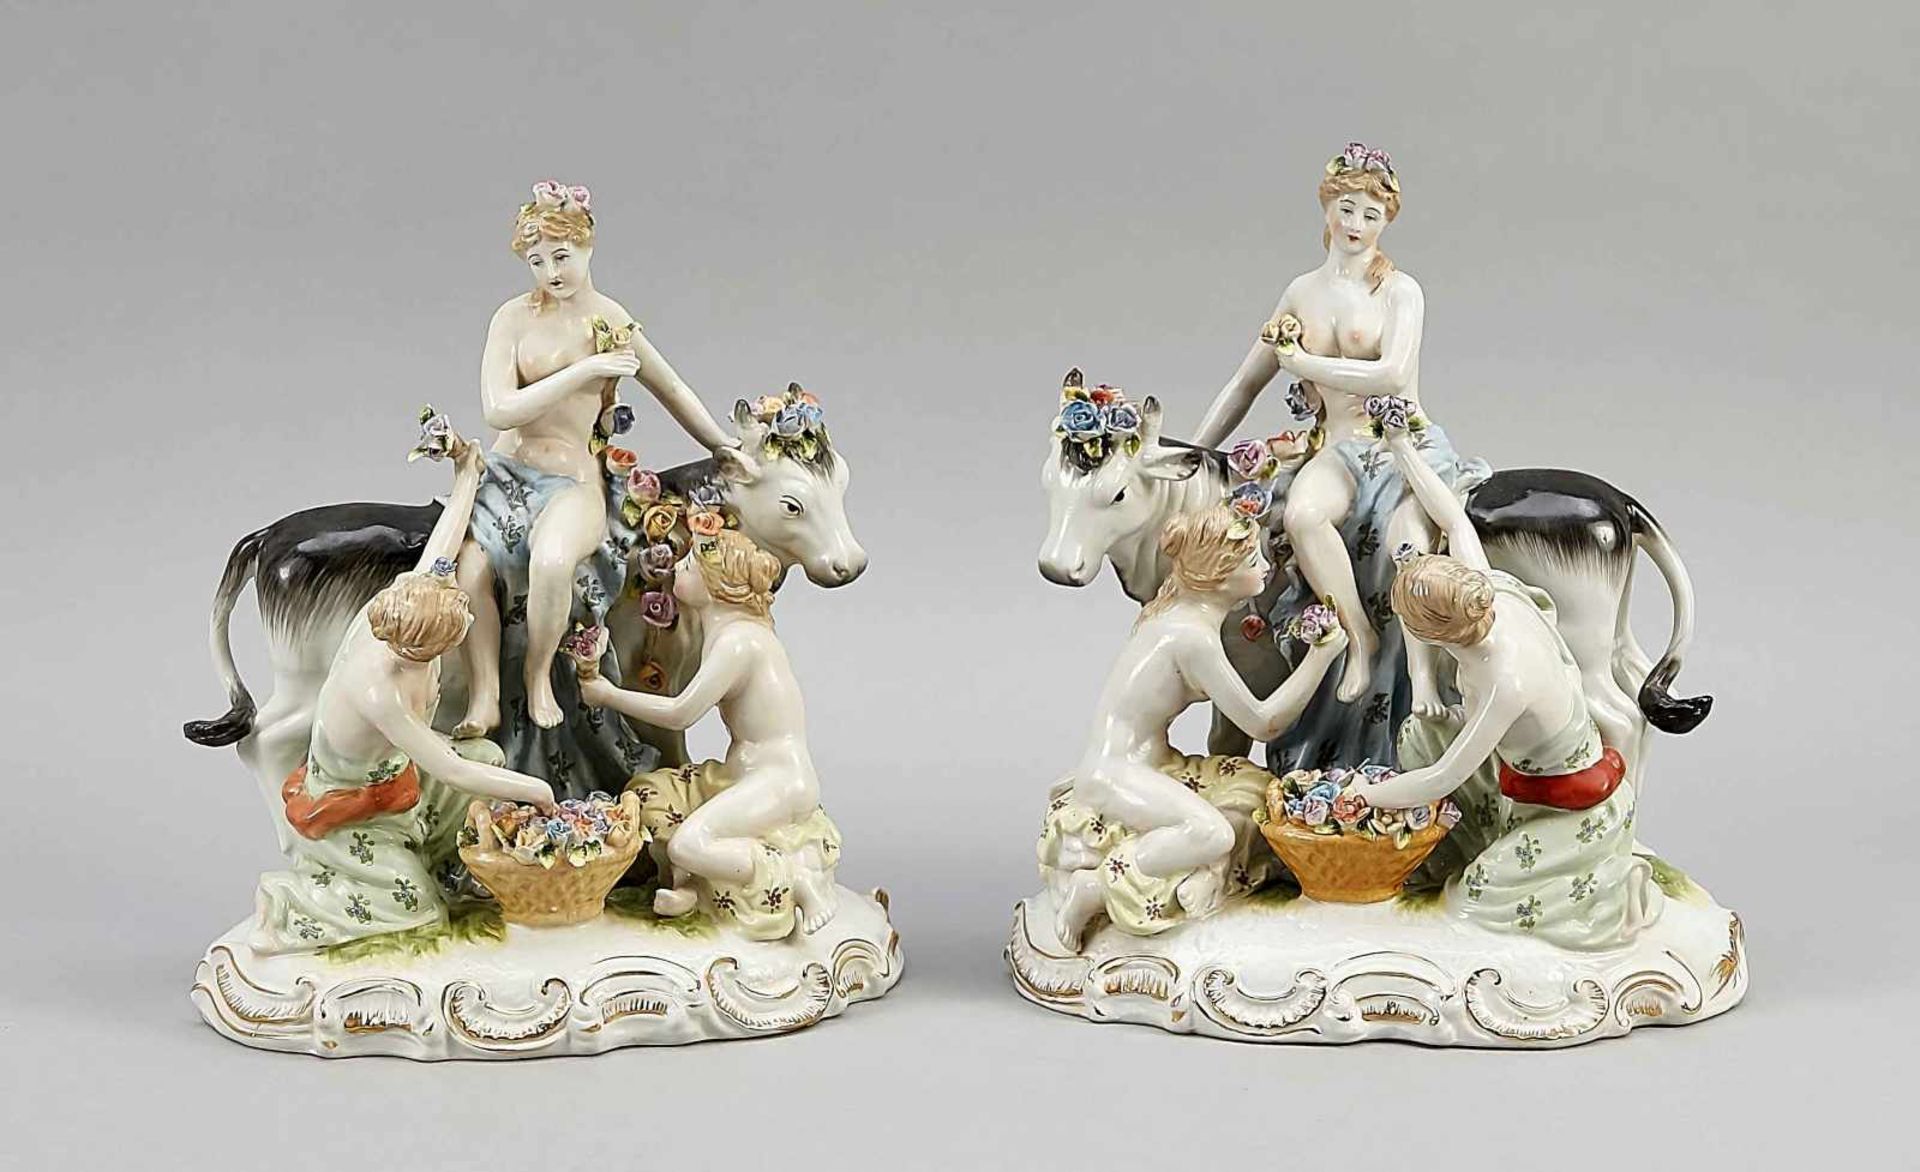 Pair of figure groups, prob. Thuringia, 20th century, after a model of the Meissen